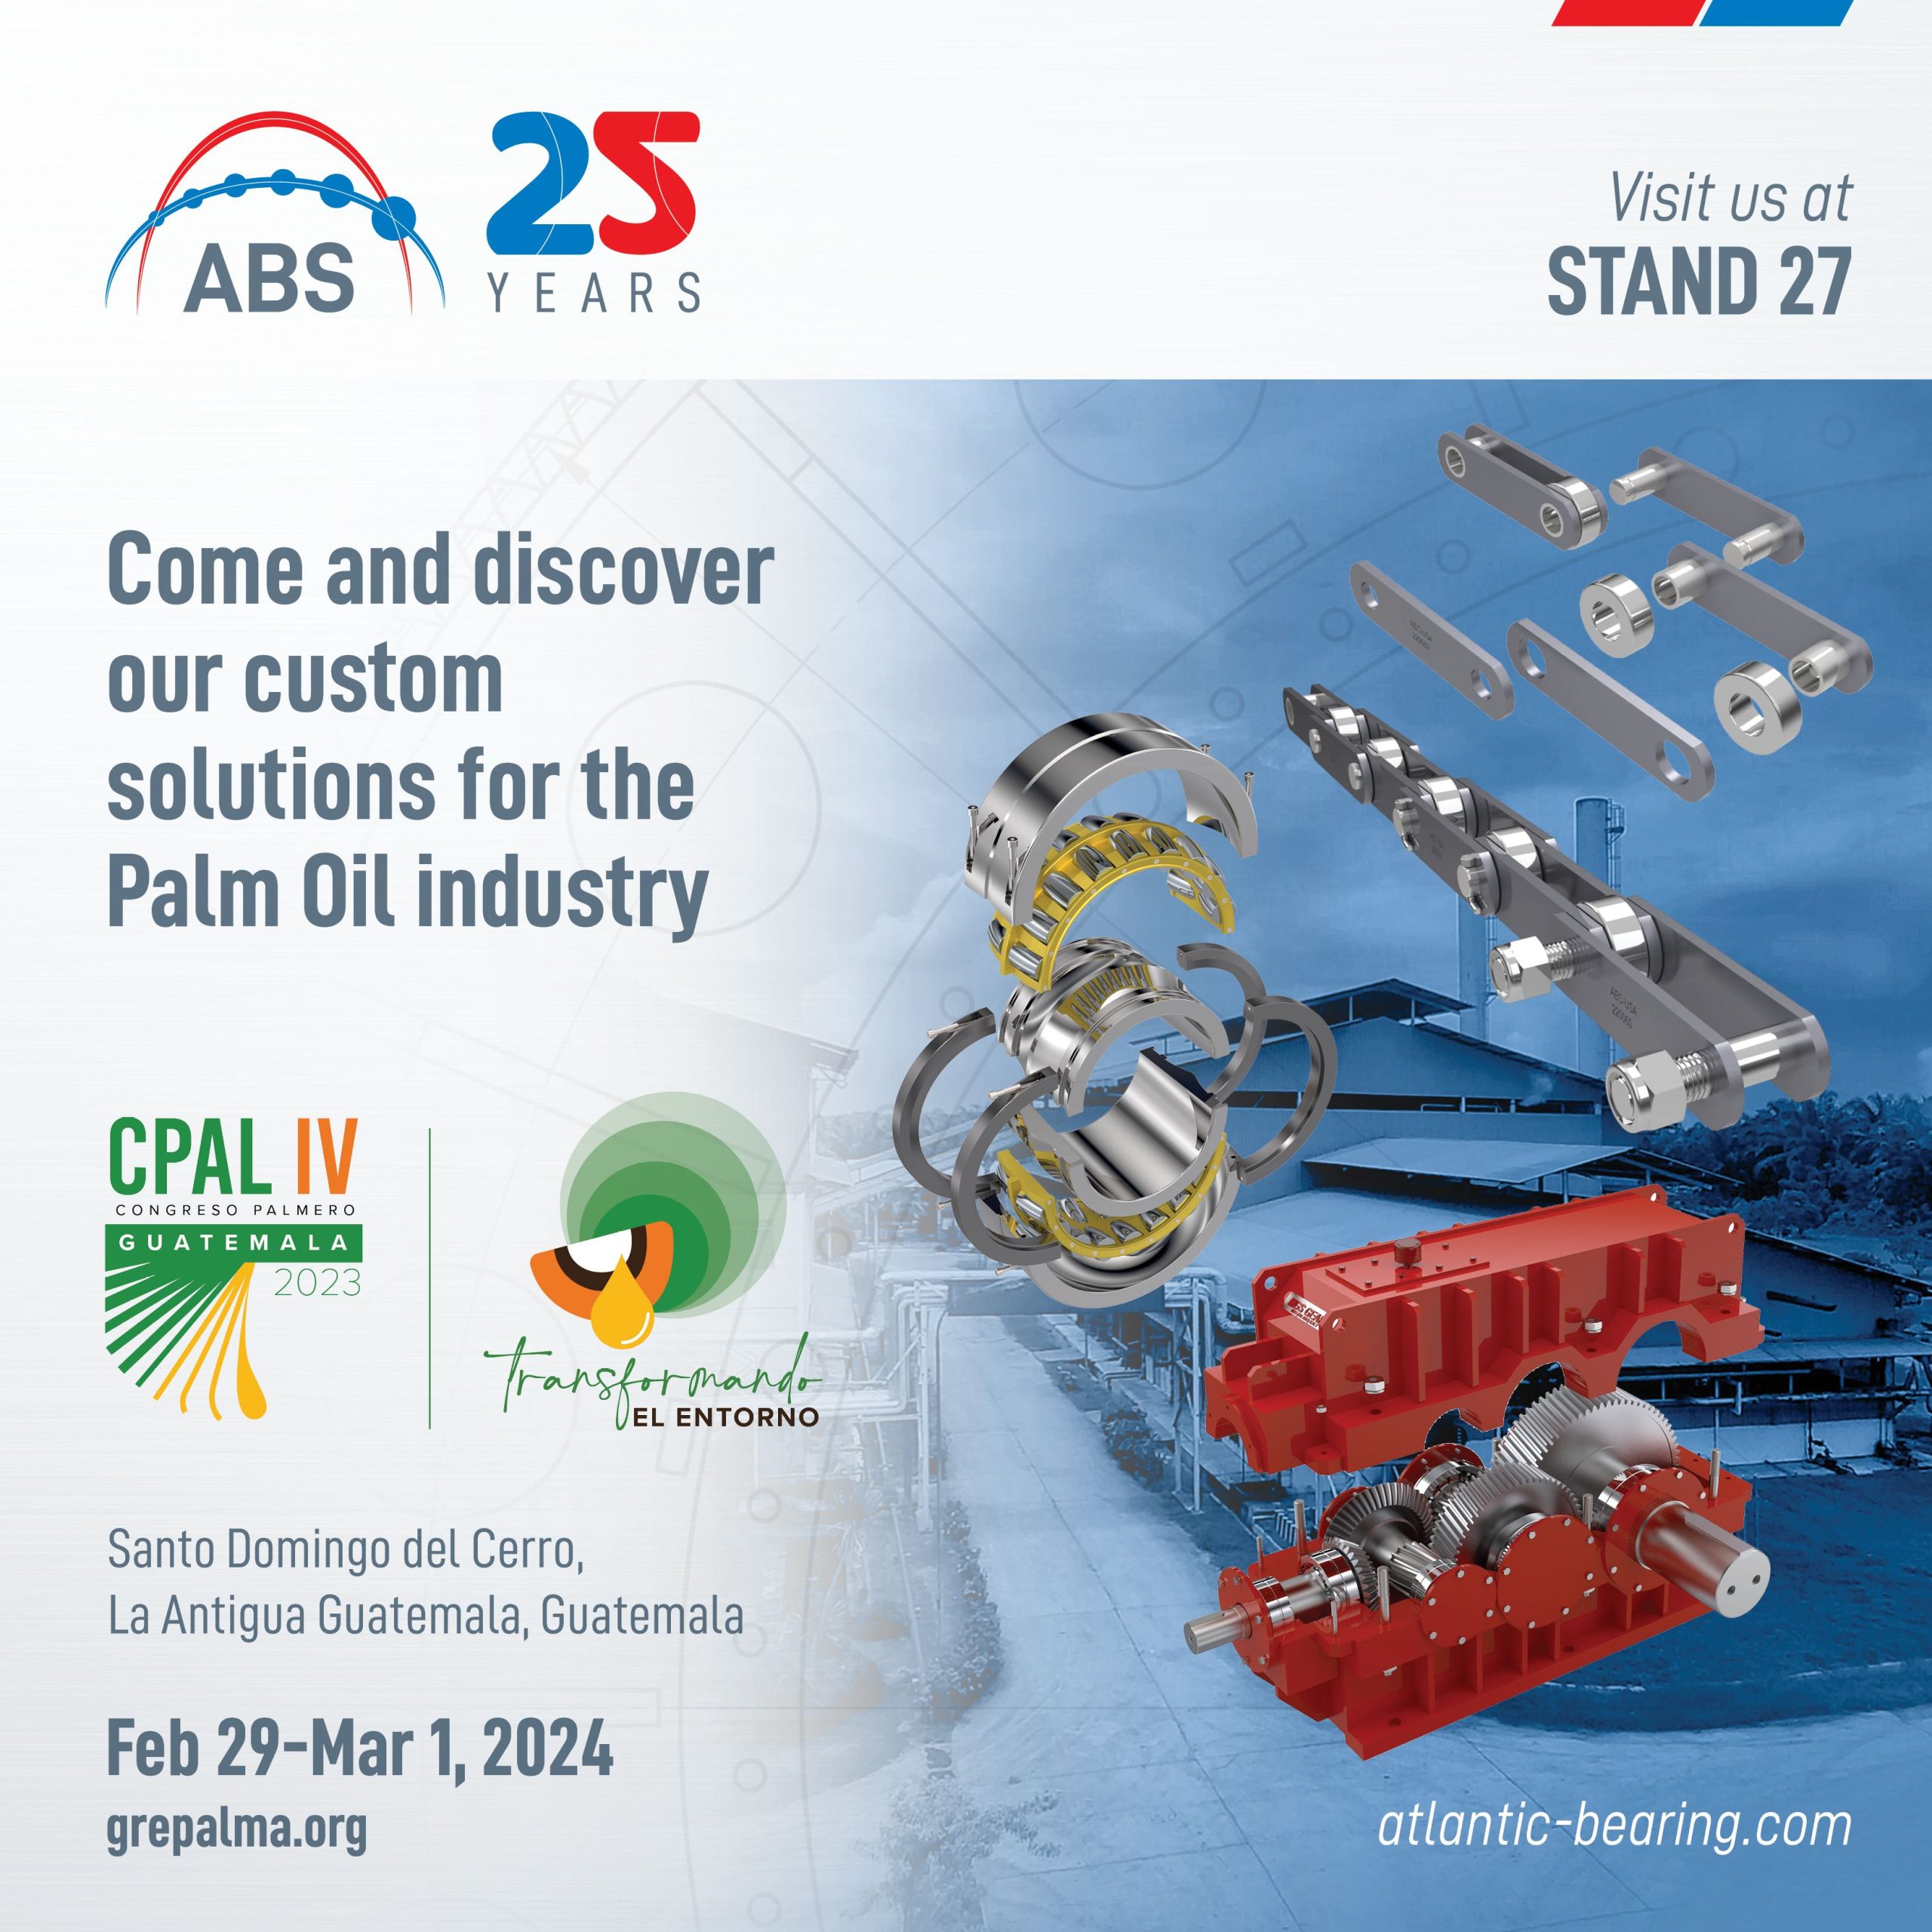 ABS to showcase custom solutions for the Palm Oil industry at Guatemalas IV CPAL Congress